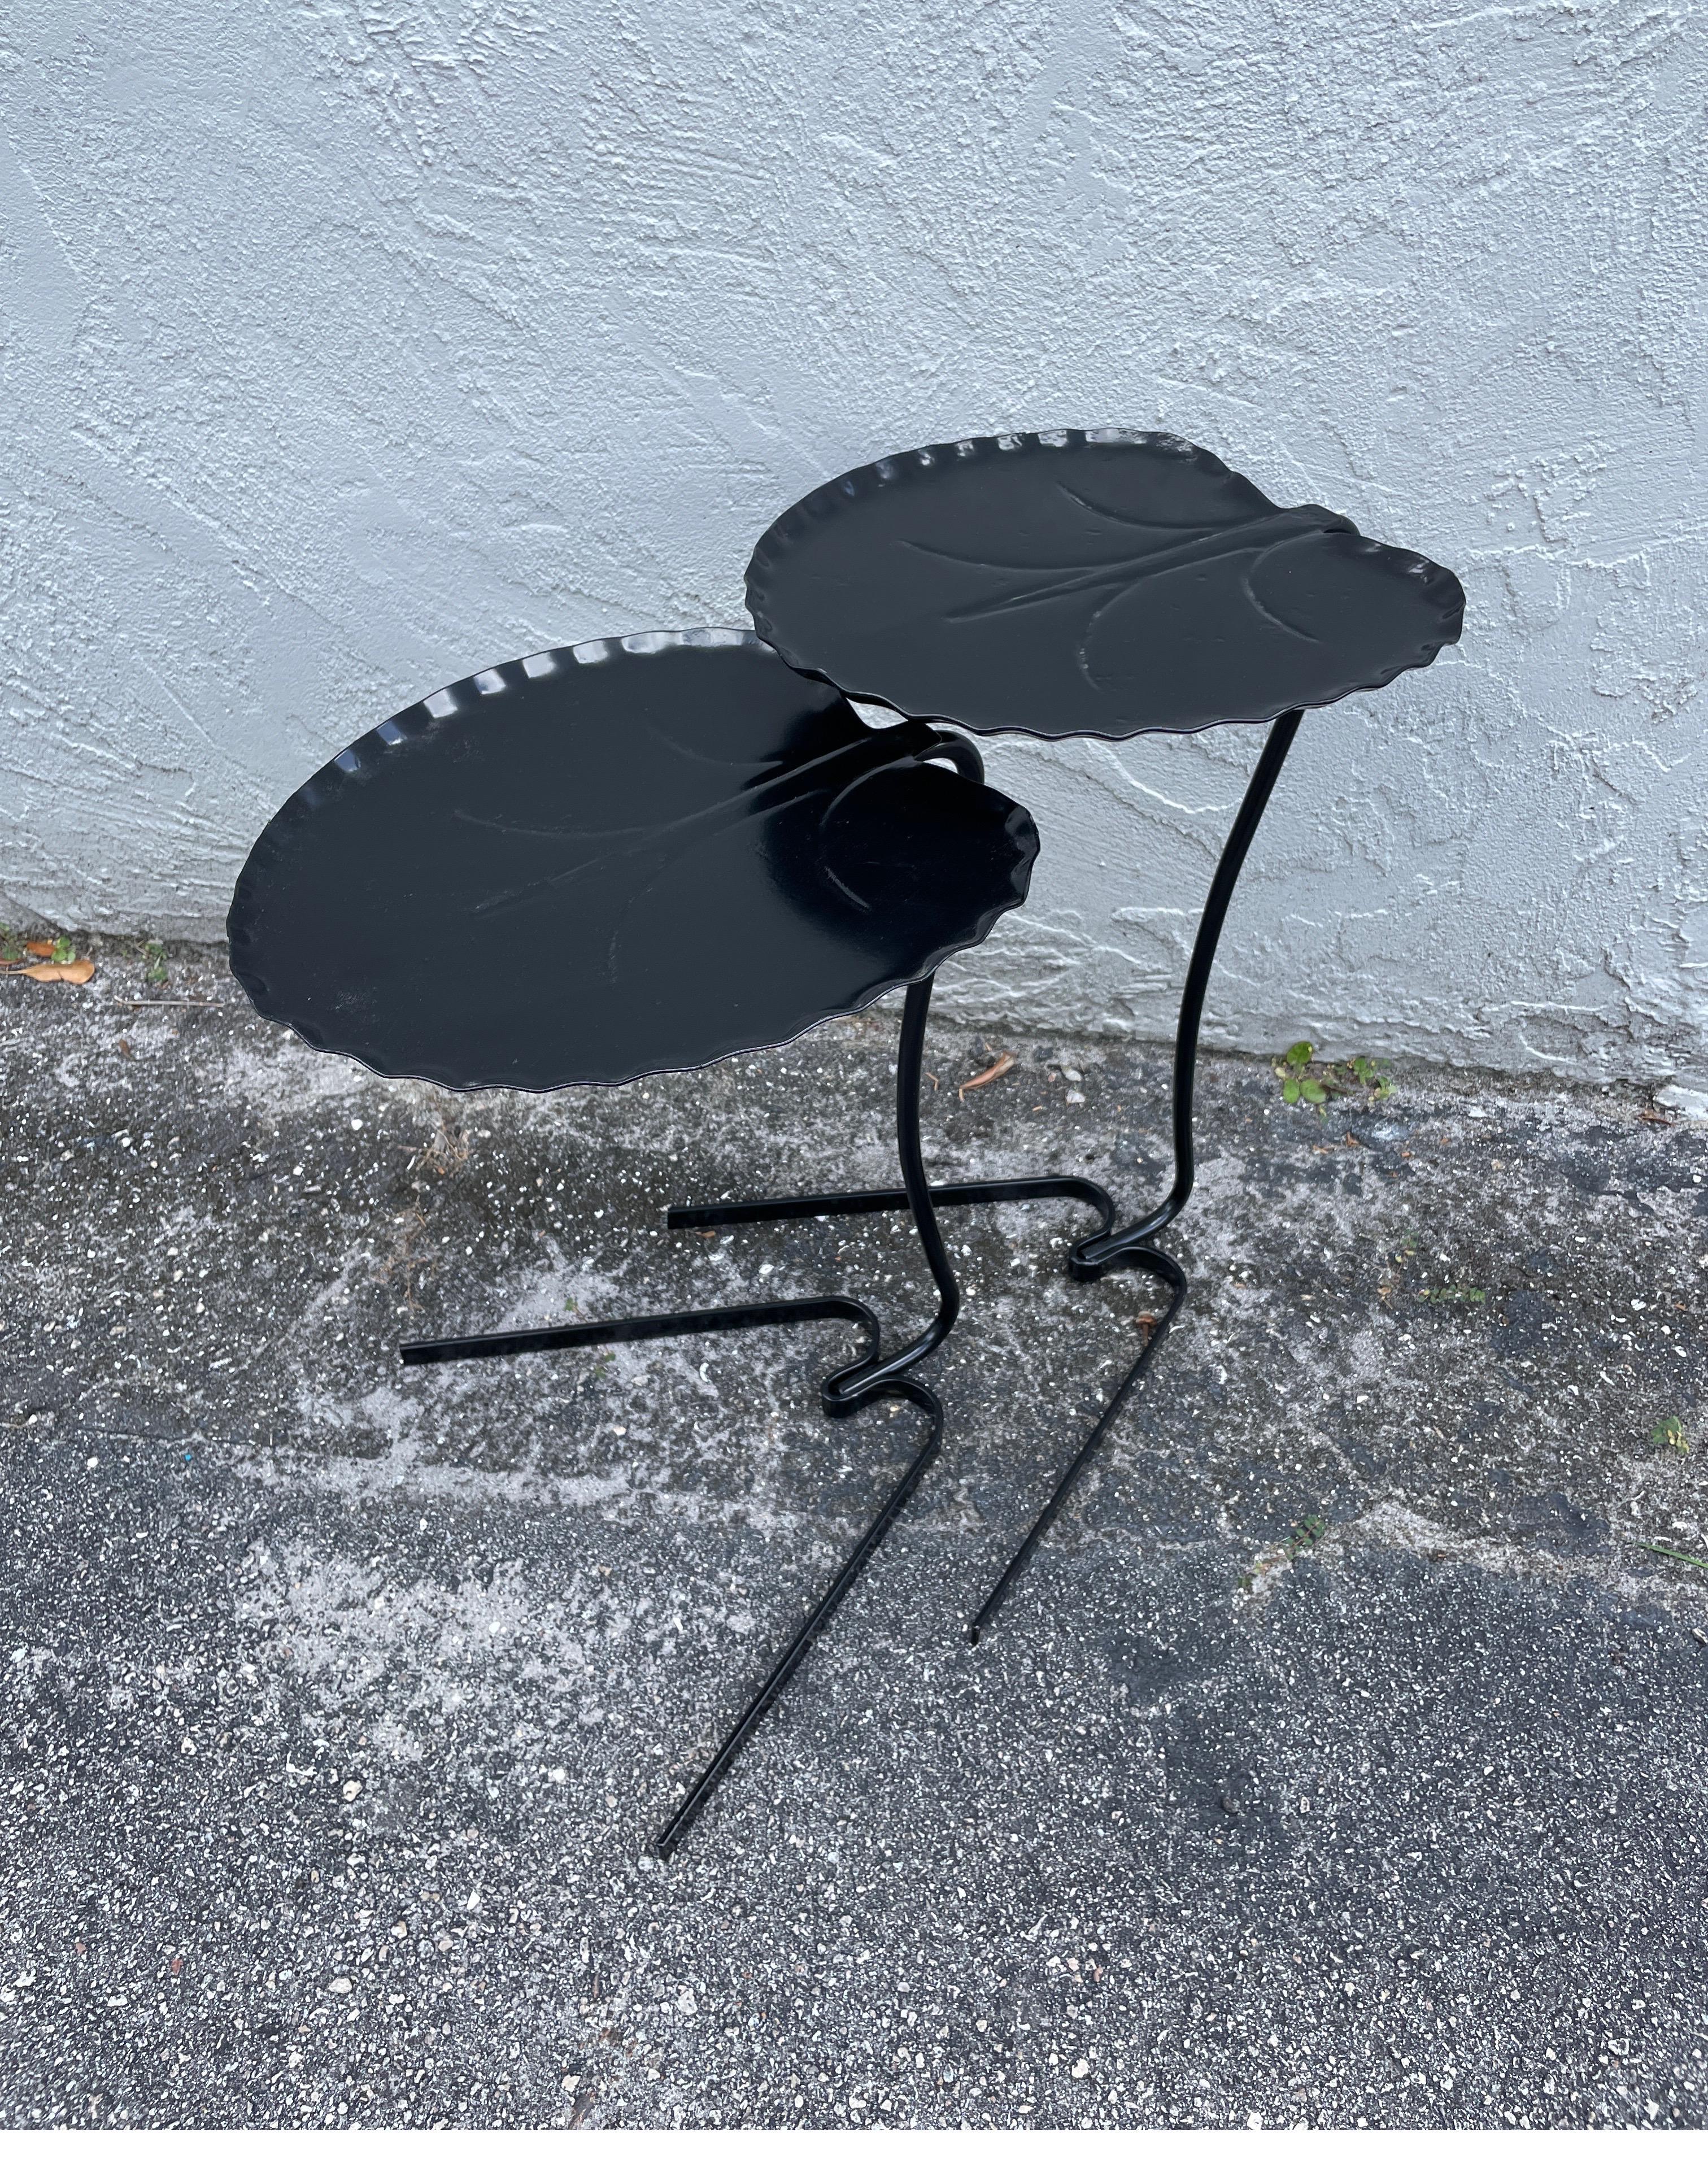 Pair of wrought iron lily pad nesting tables by Salterini. Newly powder coated.
Leaf size is 11